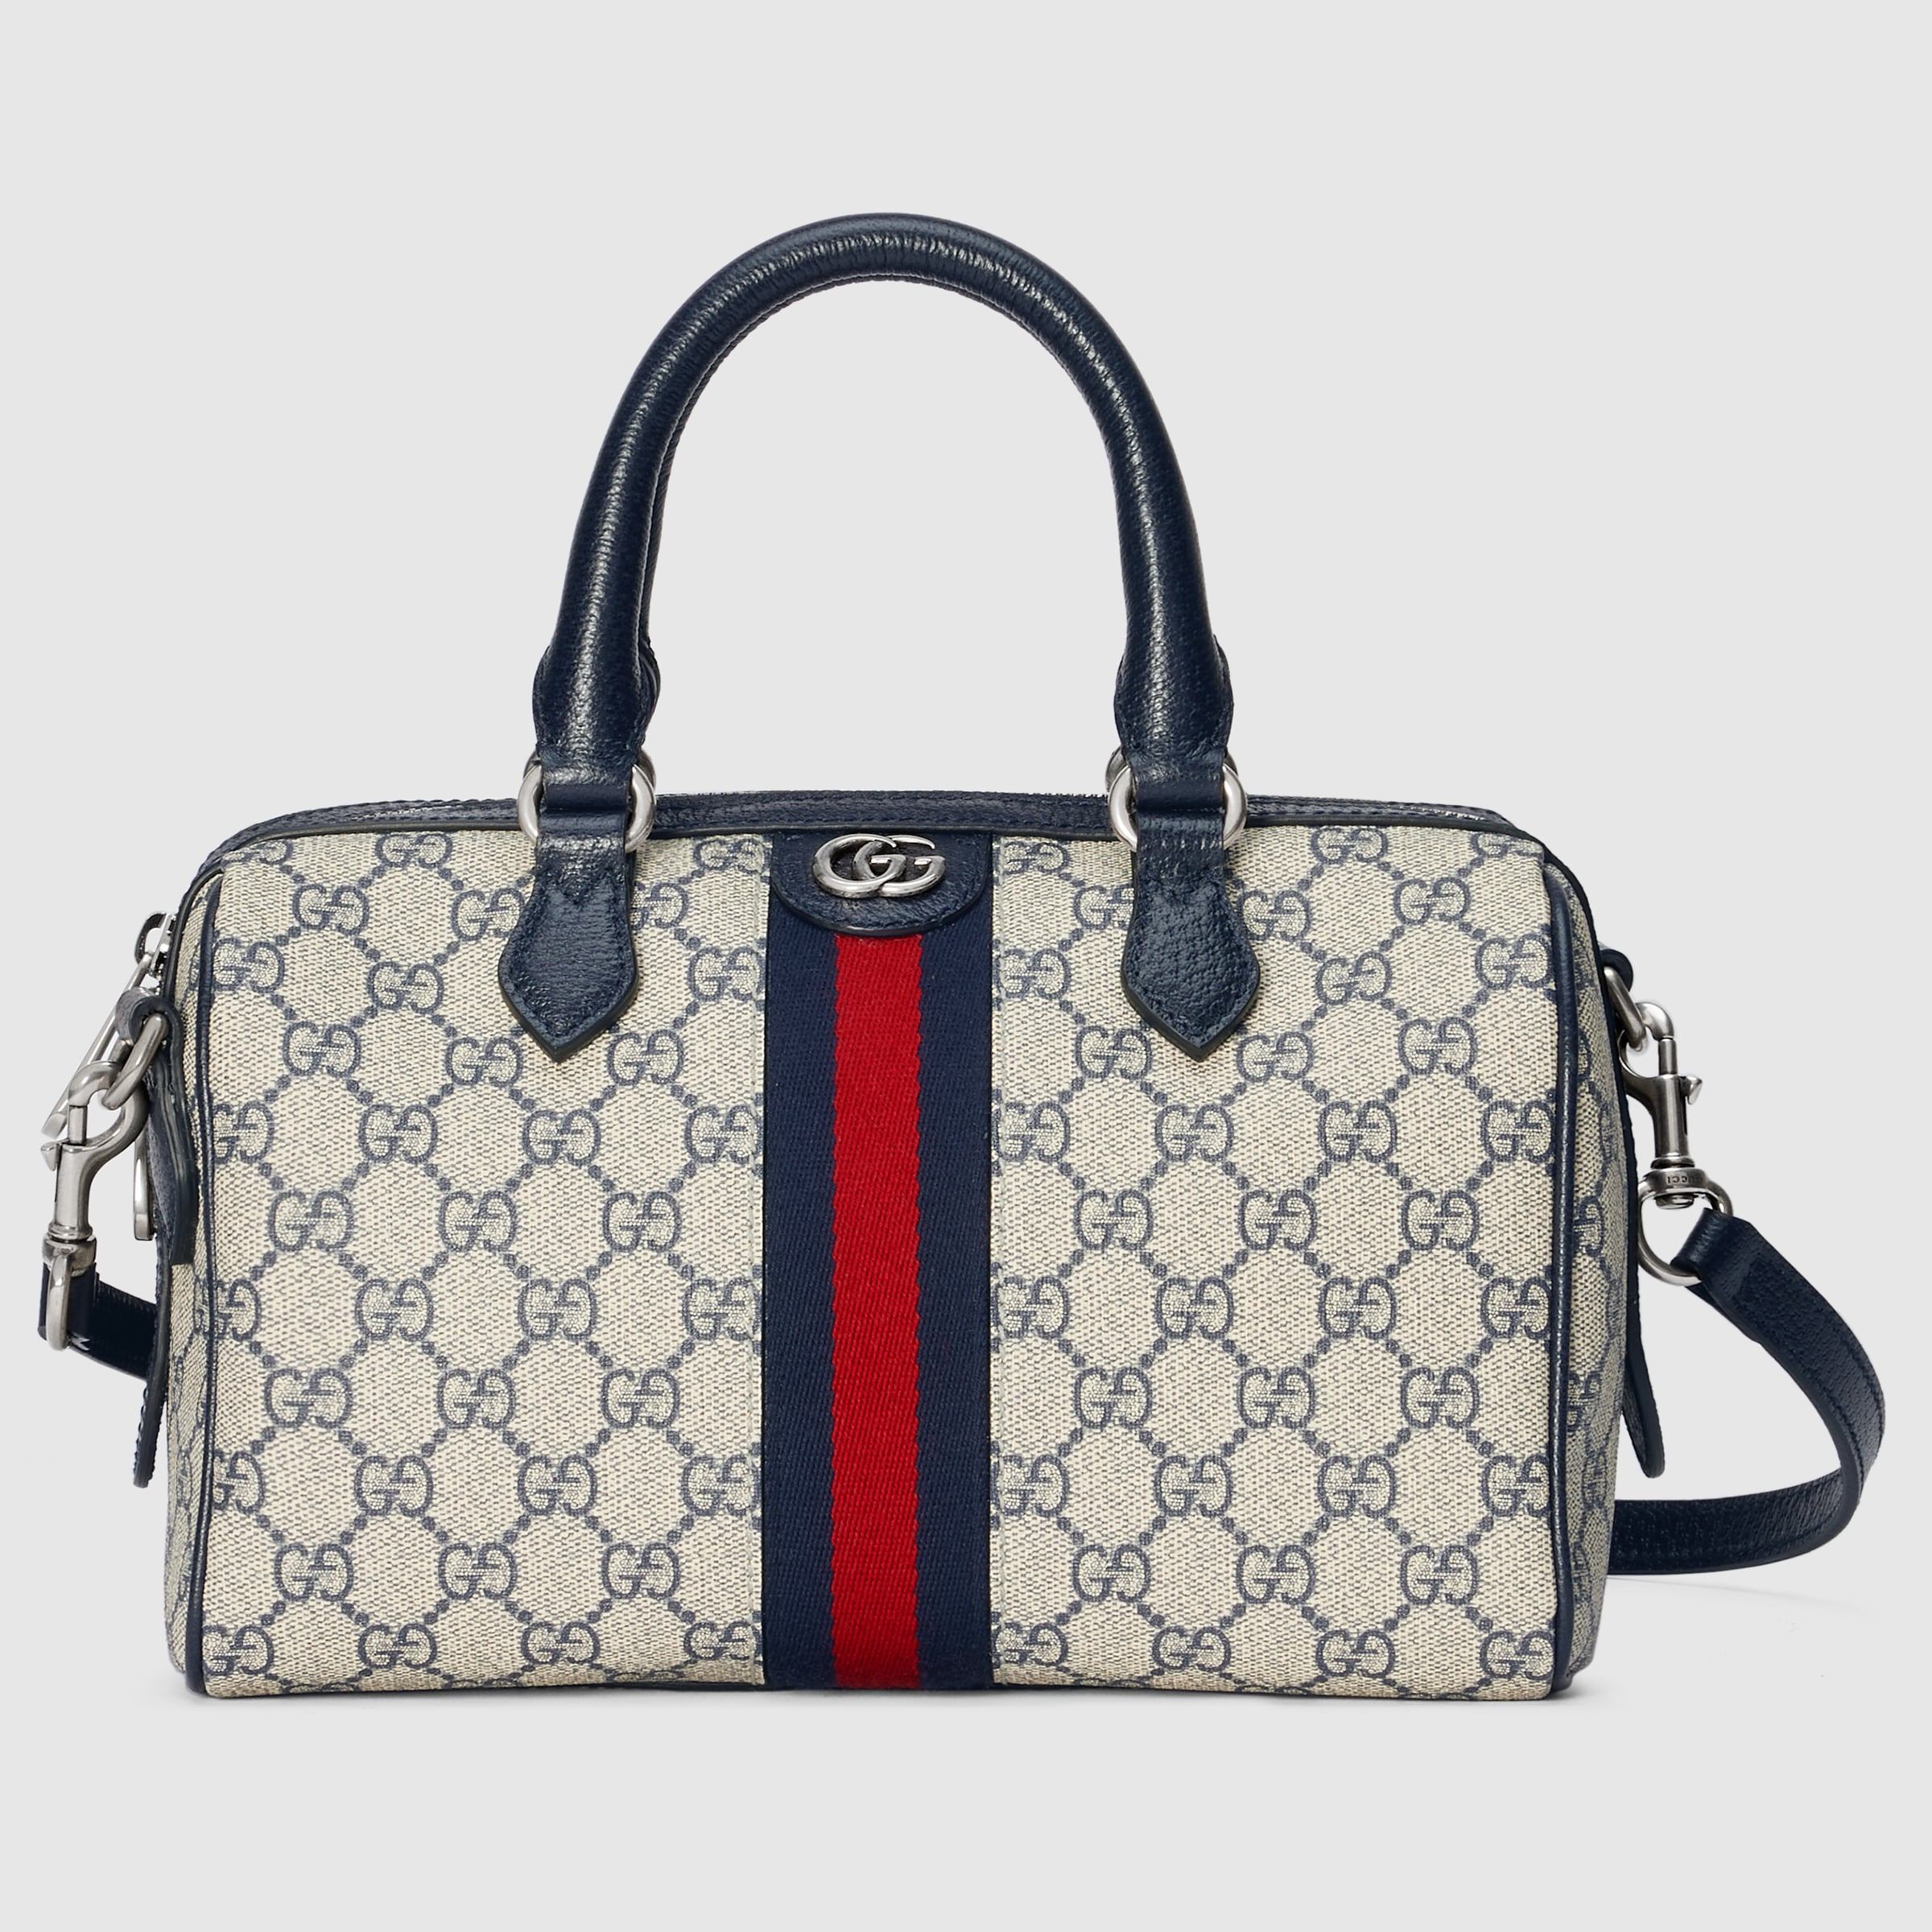 Gucci ophidia gg small top handle bag